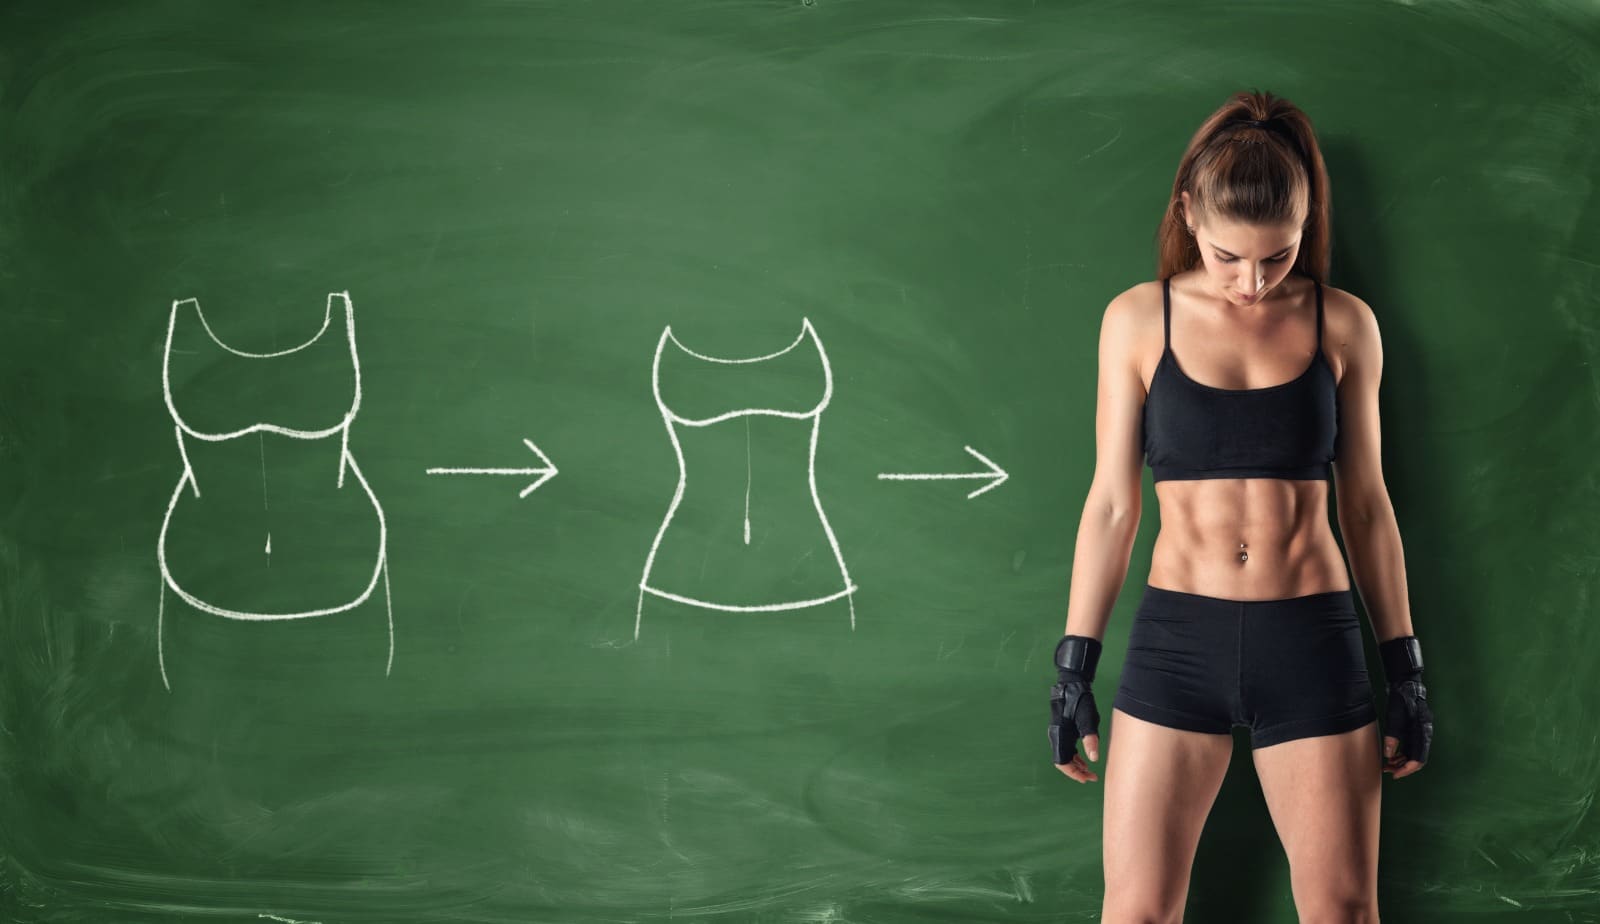 Strategies for simultaneous fat loss and muscle gain